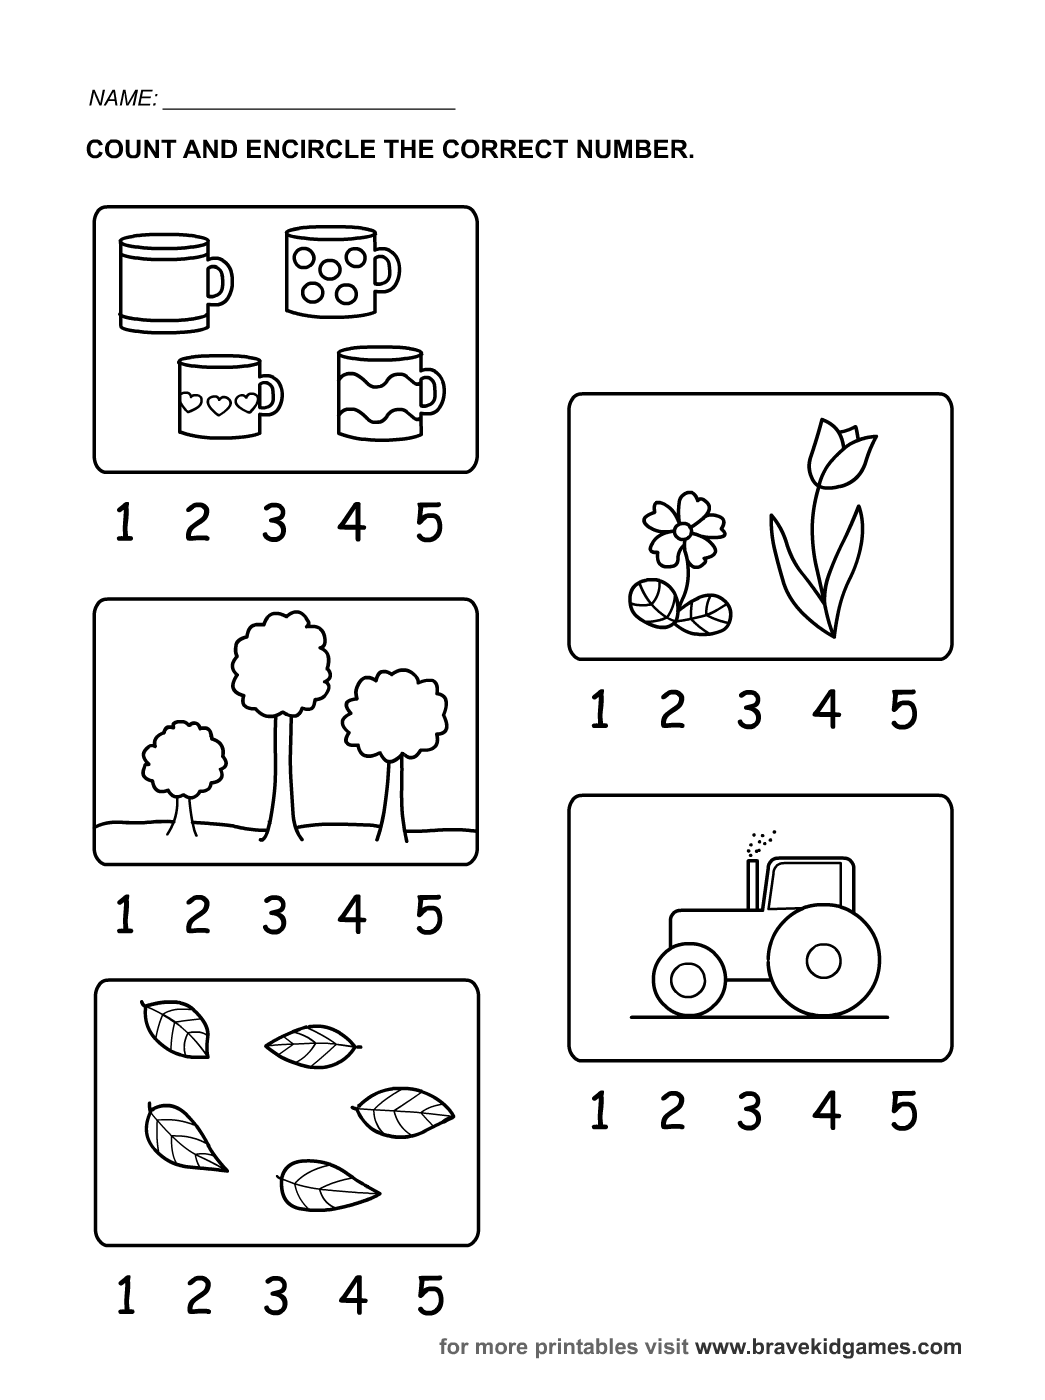 16-best-images-of-kindergarten-counting-worksheets-1-5-count-and